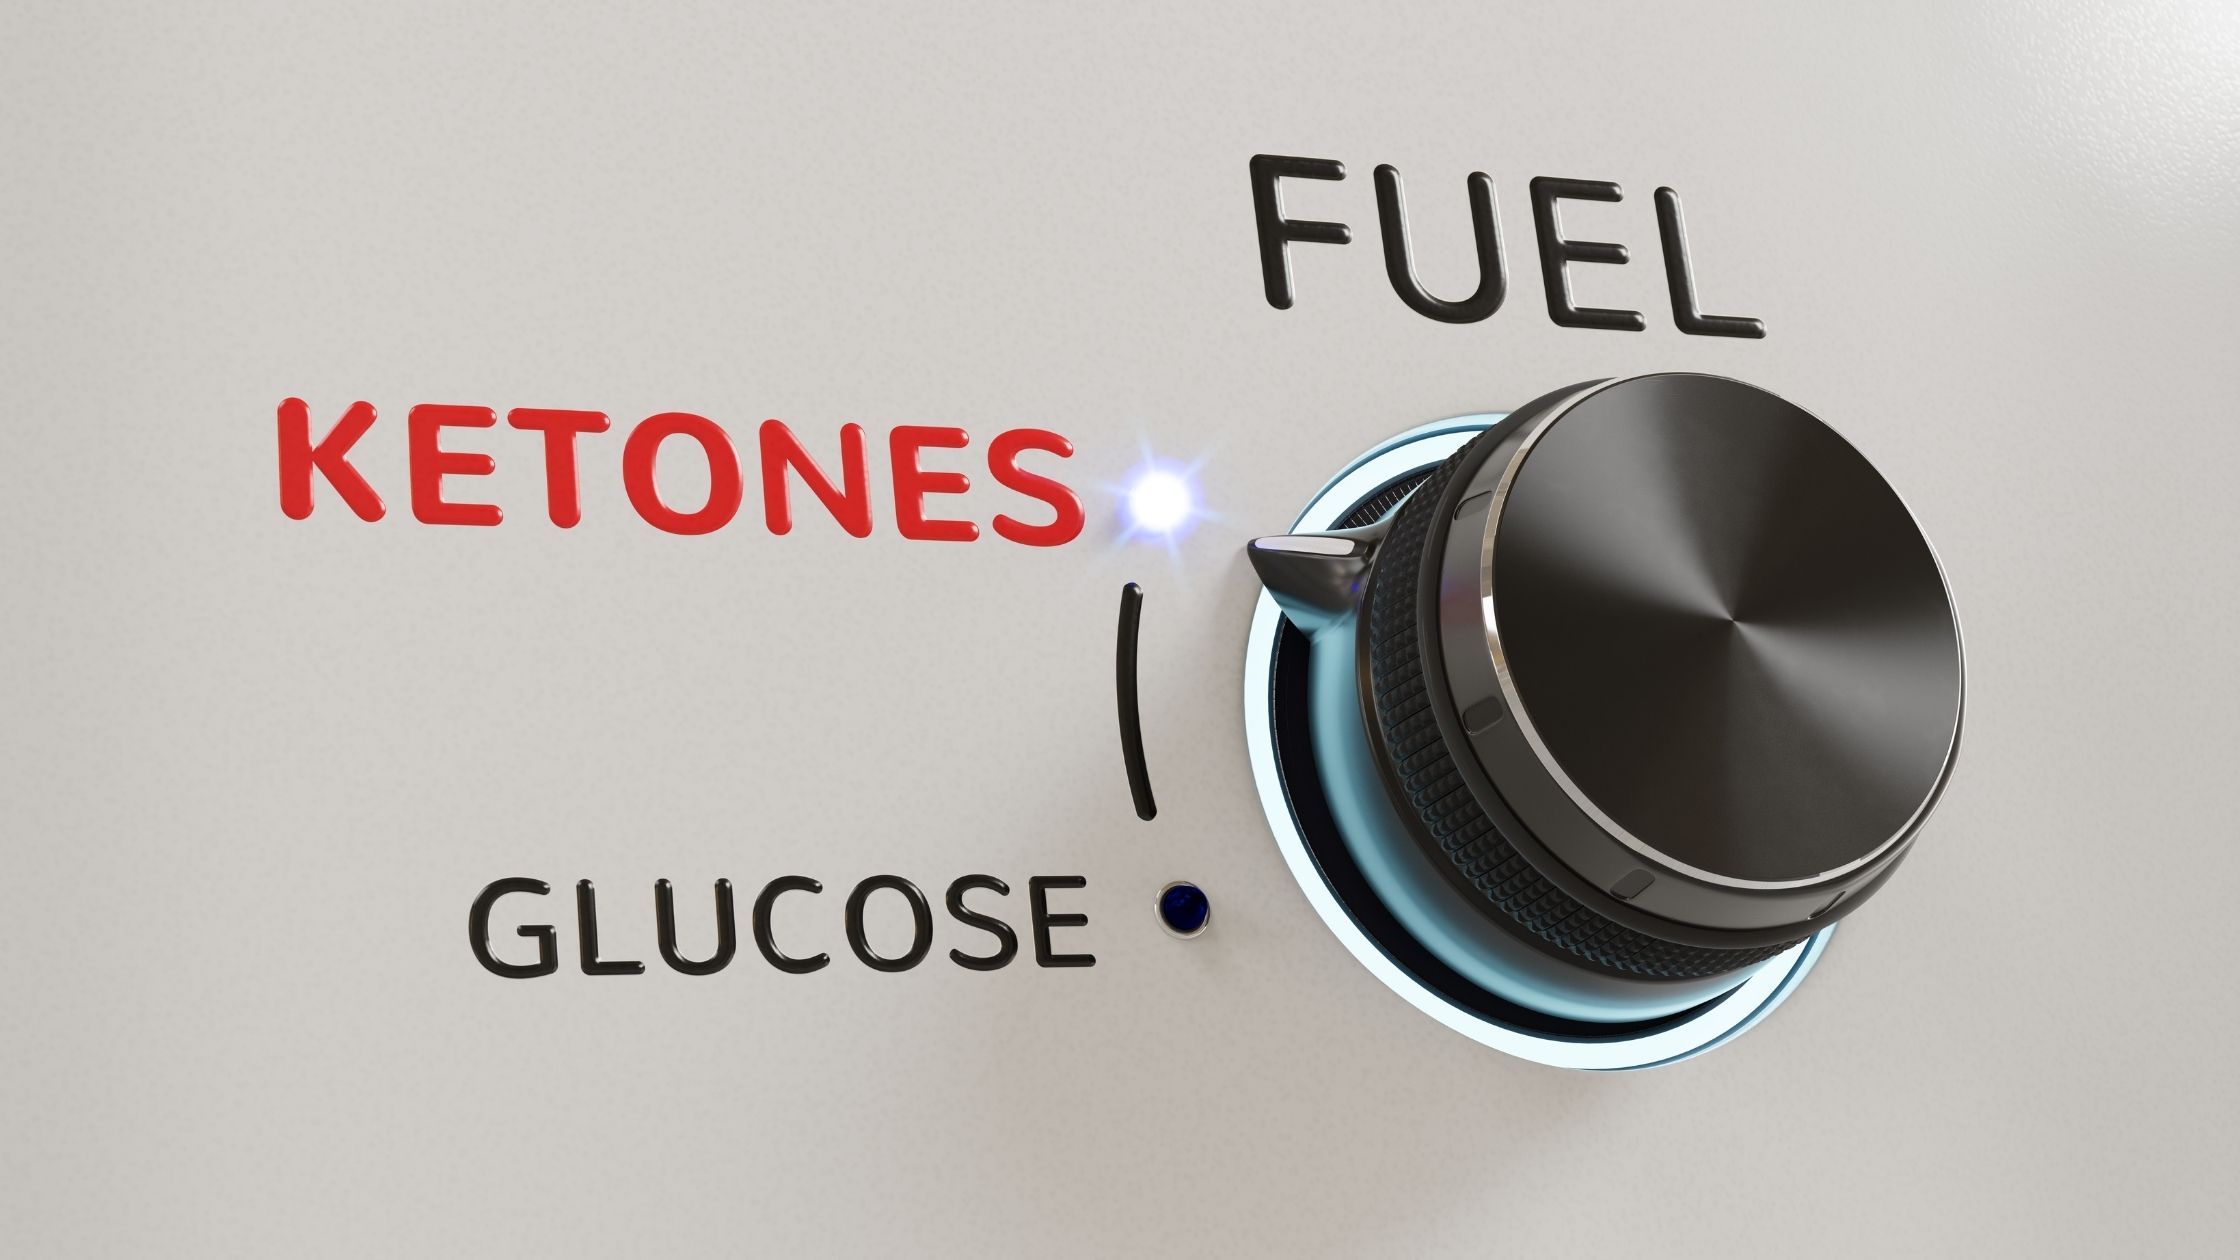 A fuel dial pointing at ketones instead of glucose